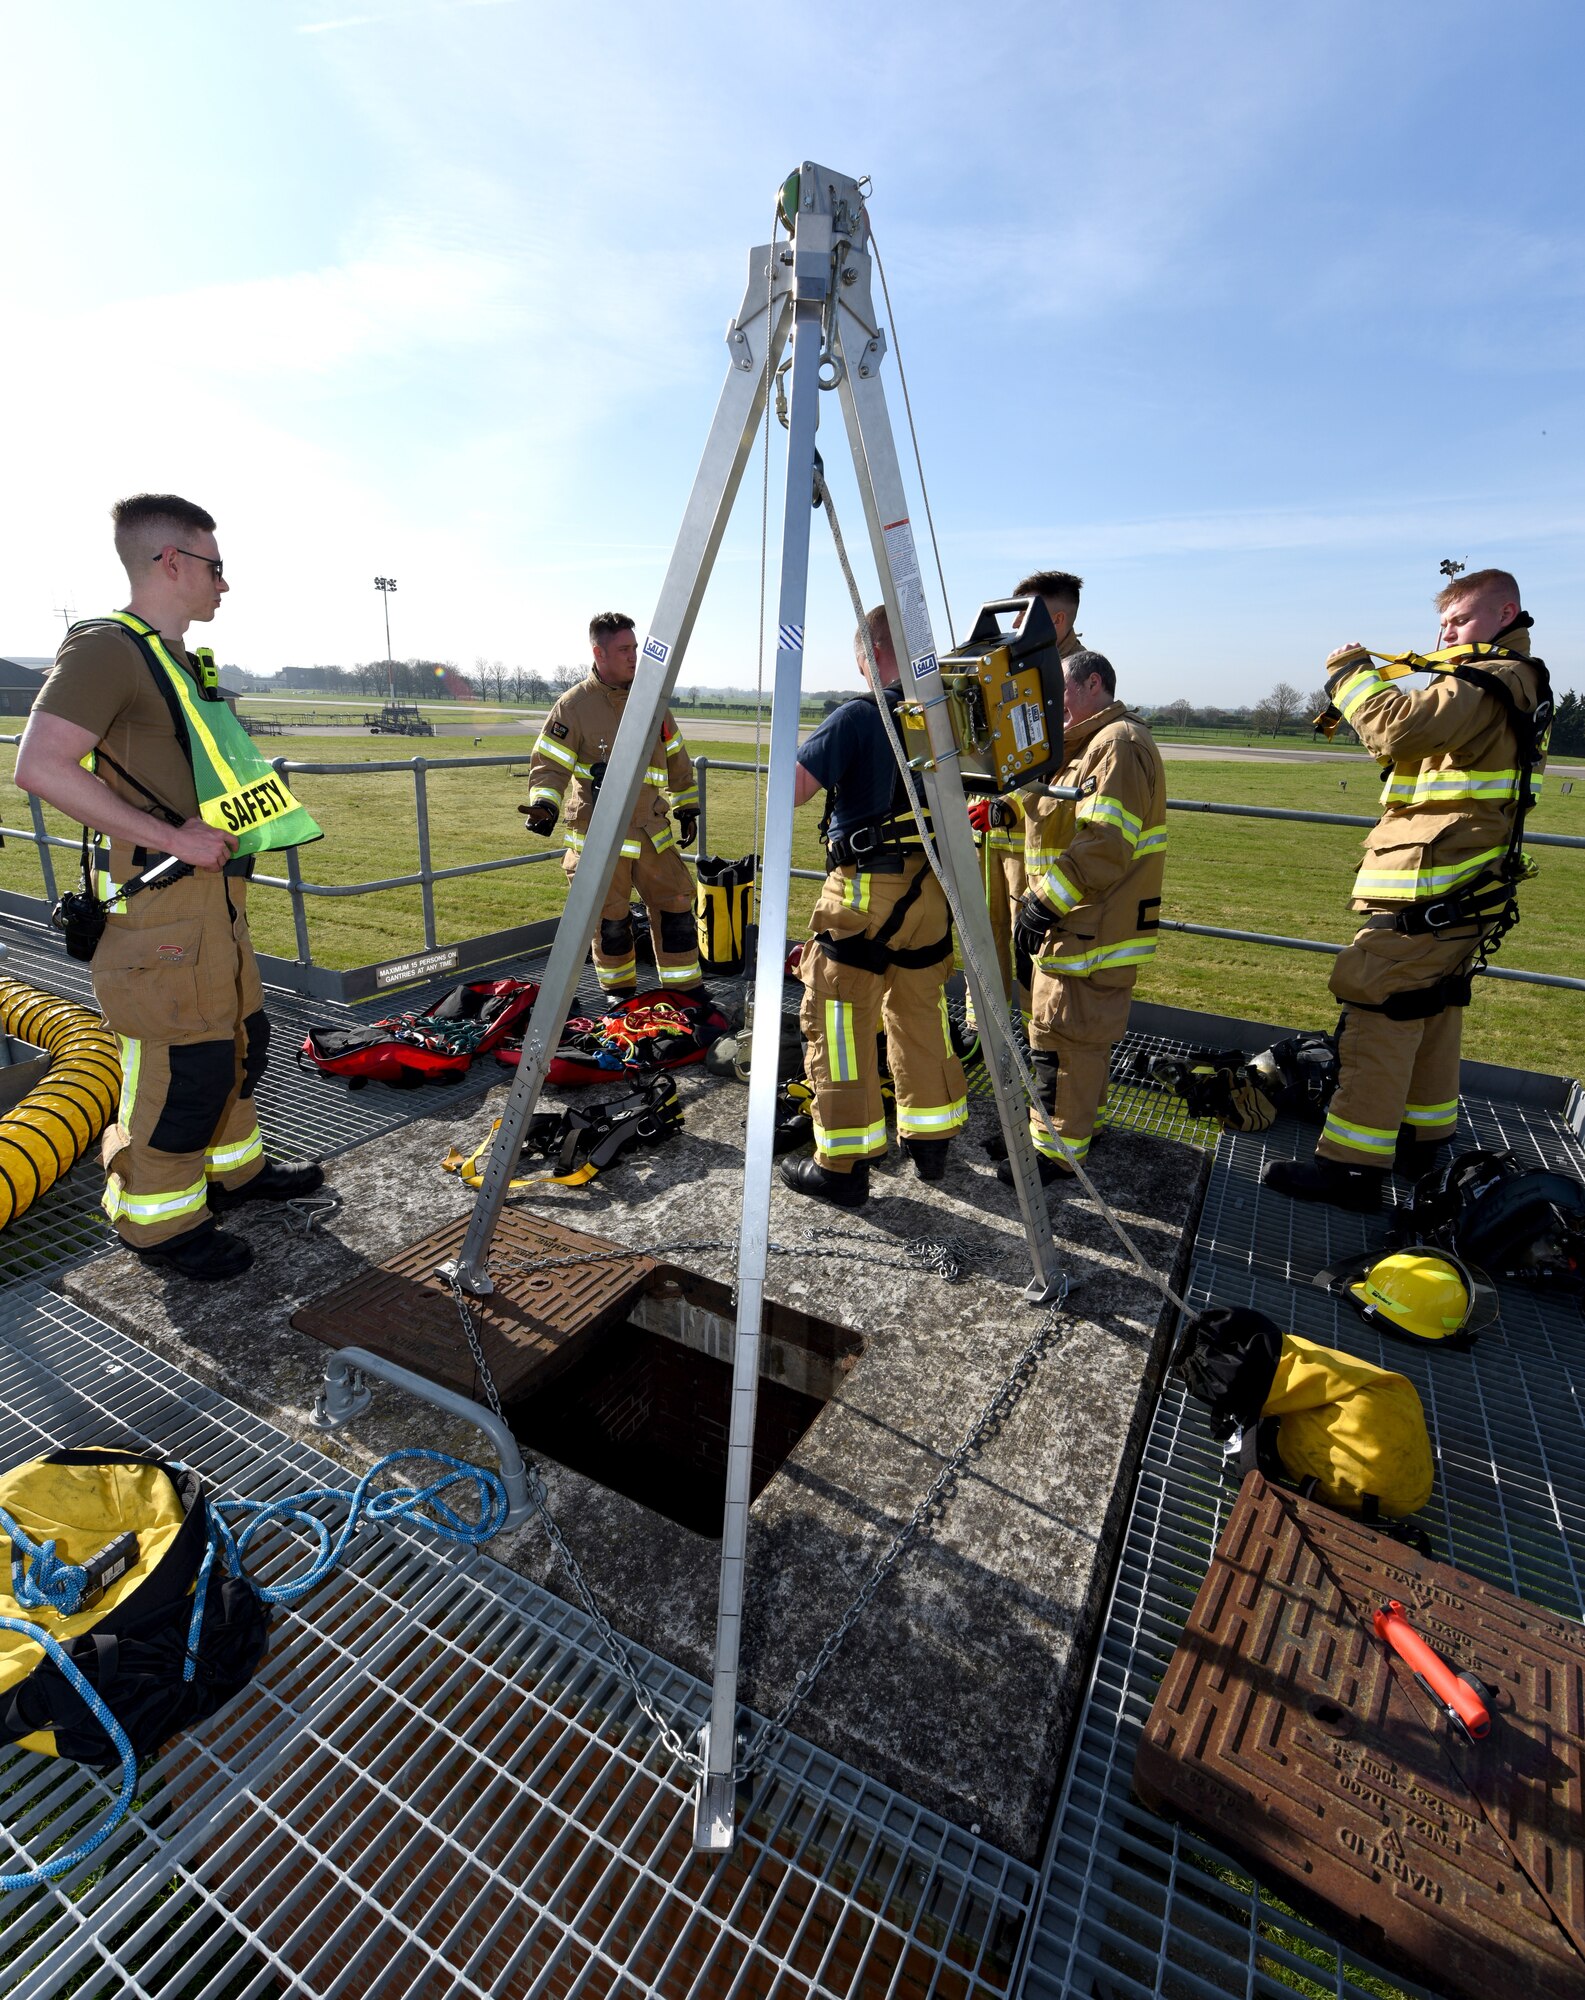 U.S. Air Force and British civilian firefighters, assigned to the 100th Civil Engineer Squadron Fire Department, carry out confined-space training at the purpose-built facility at Royal Air Force Mildenhall, England, April 14, 2022.  The fire department conducts a full confined-space drill at least four times a year for firefighters to meet training requirements. It’s vital for them to stay proficient with confined space and rescue to ensure they can successfully respond to real-world emergencies. (U.S. Air Force photo by Karen Abeyasekere)